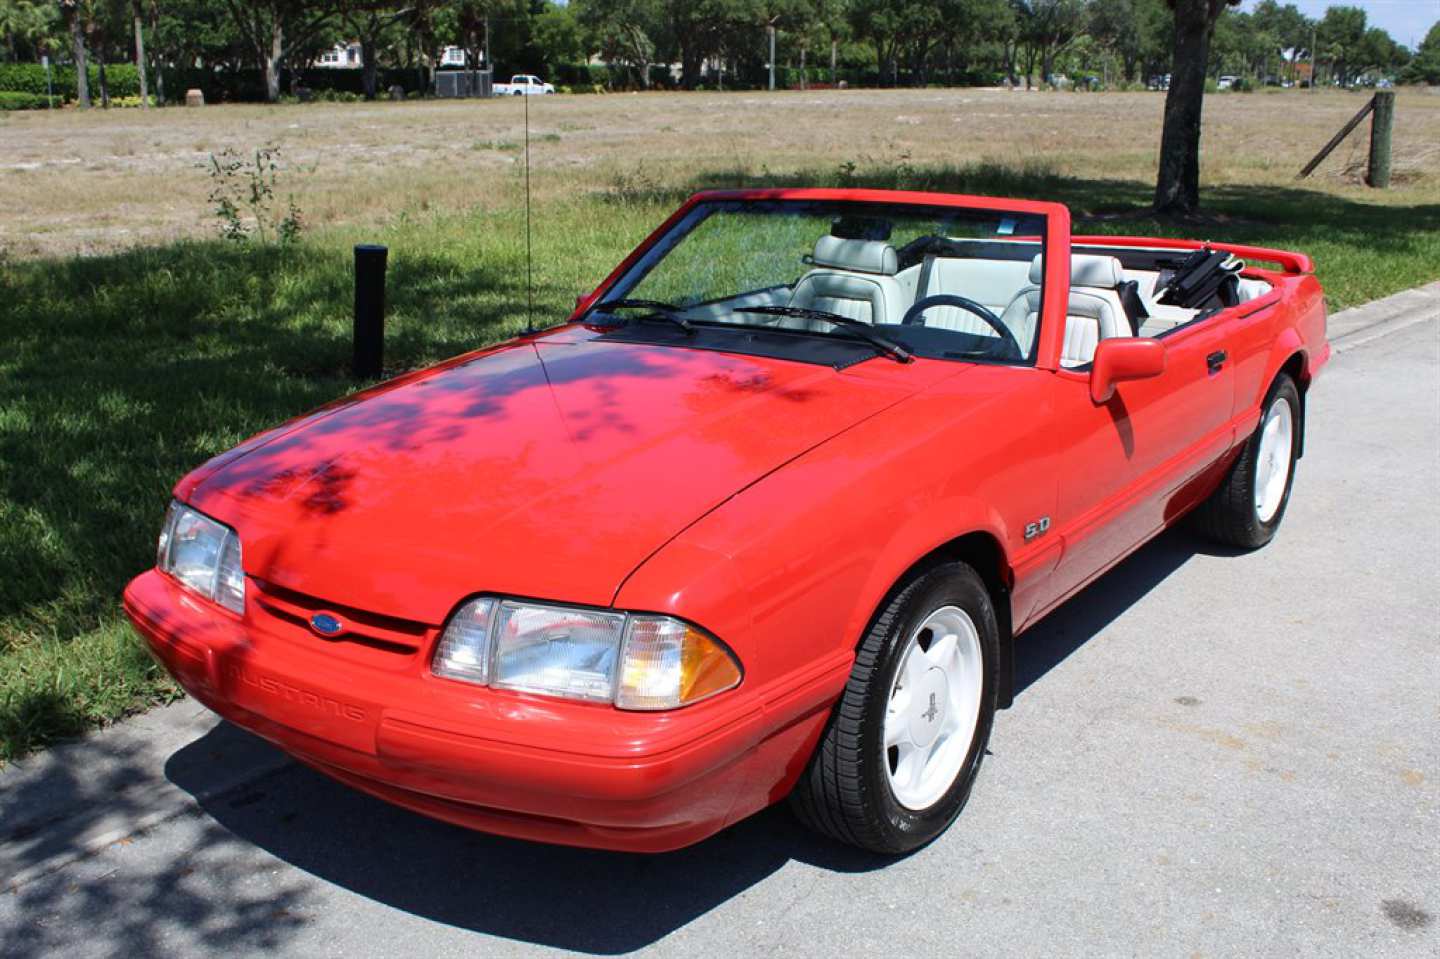 3rd Image of a 1992 FORD MUSTANG LX